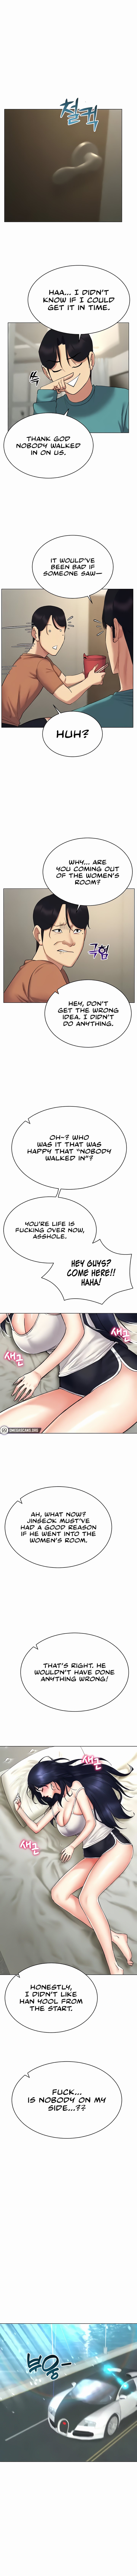 Using Eroge Abilities In Real Life - Chapter 20 Page 7